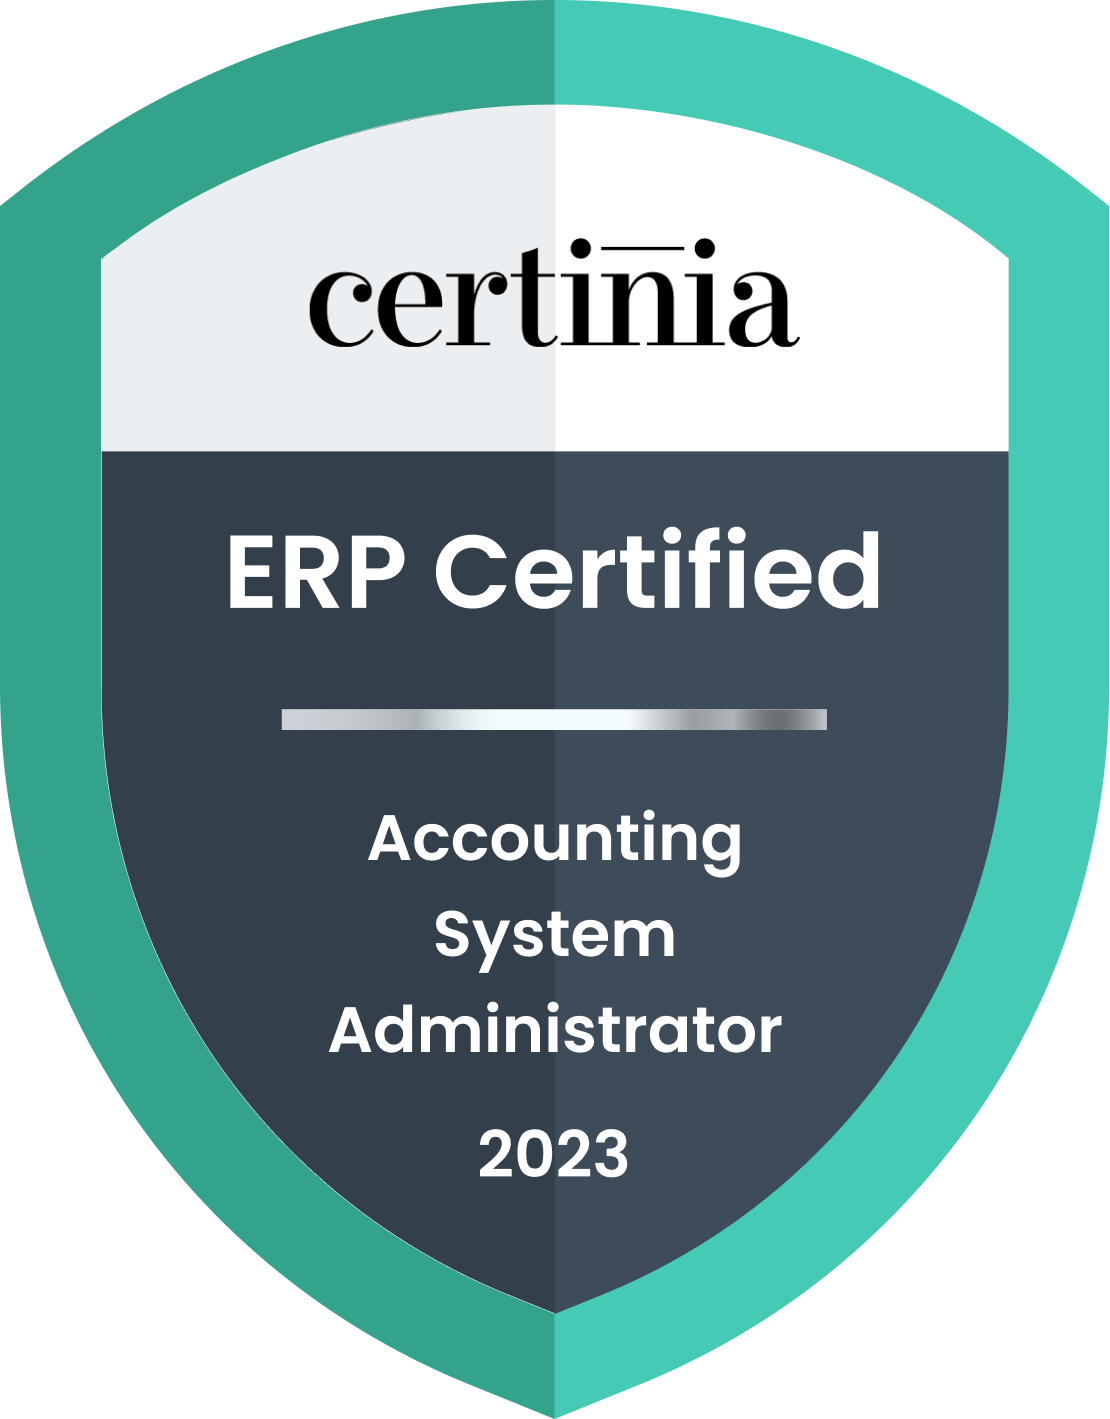 Certinia certification for Accounting Systems Administrator 2023 Badge